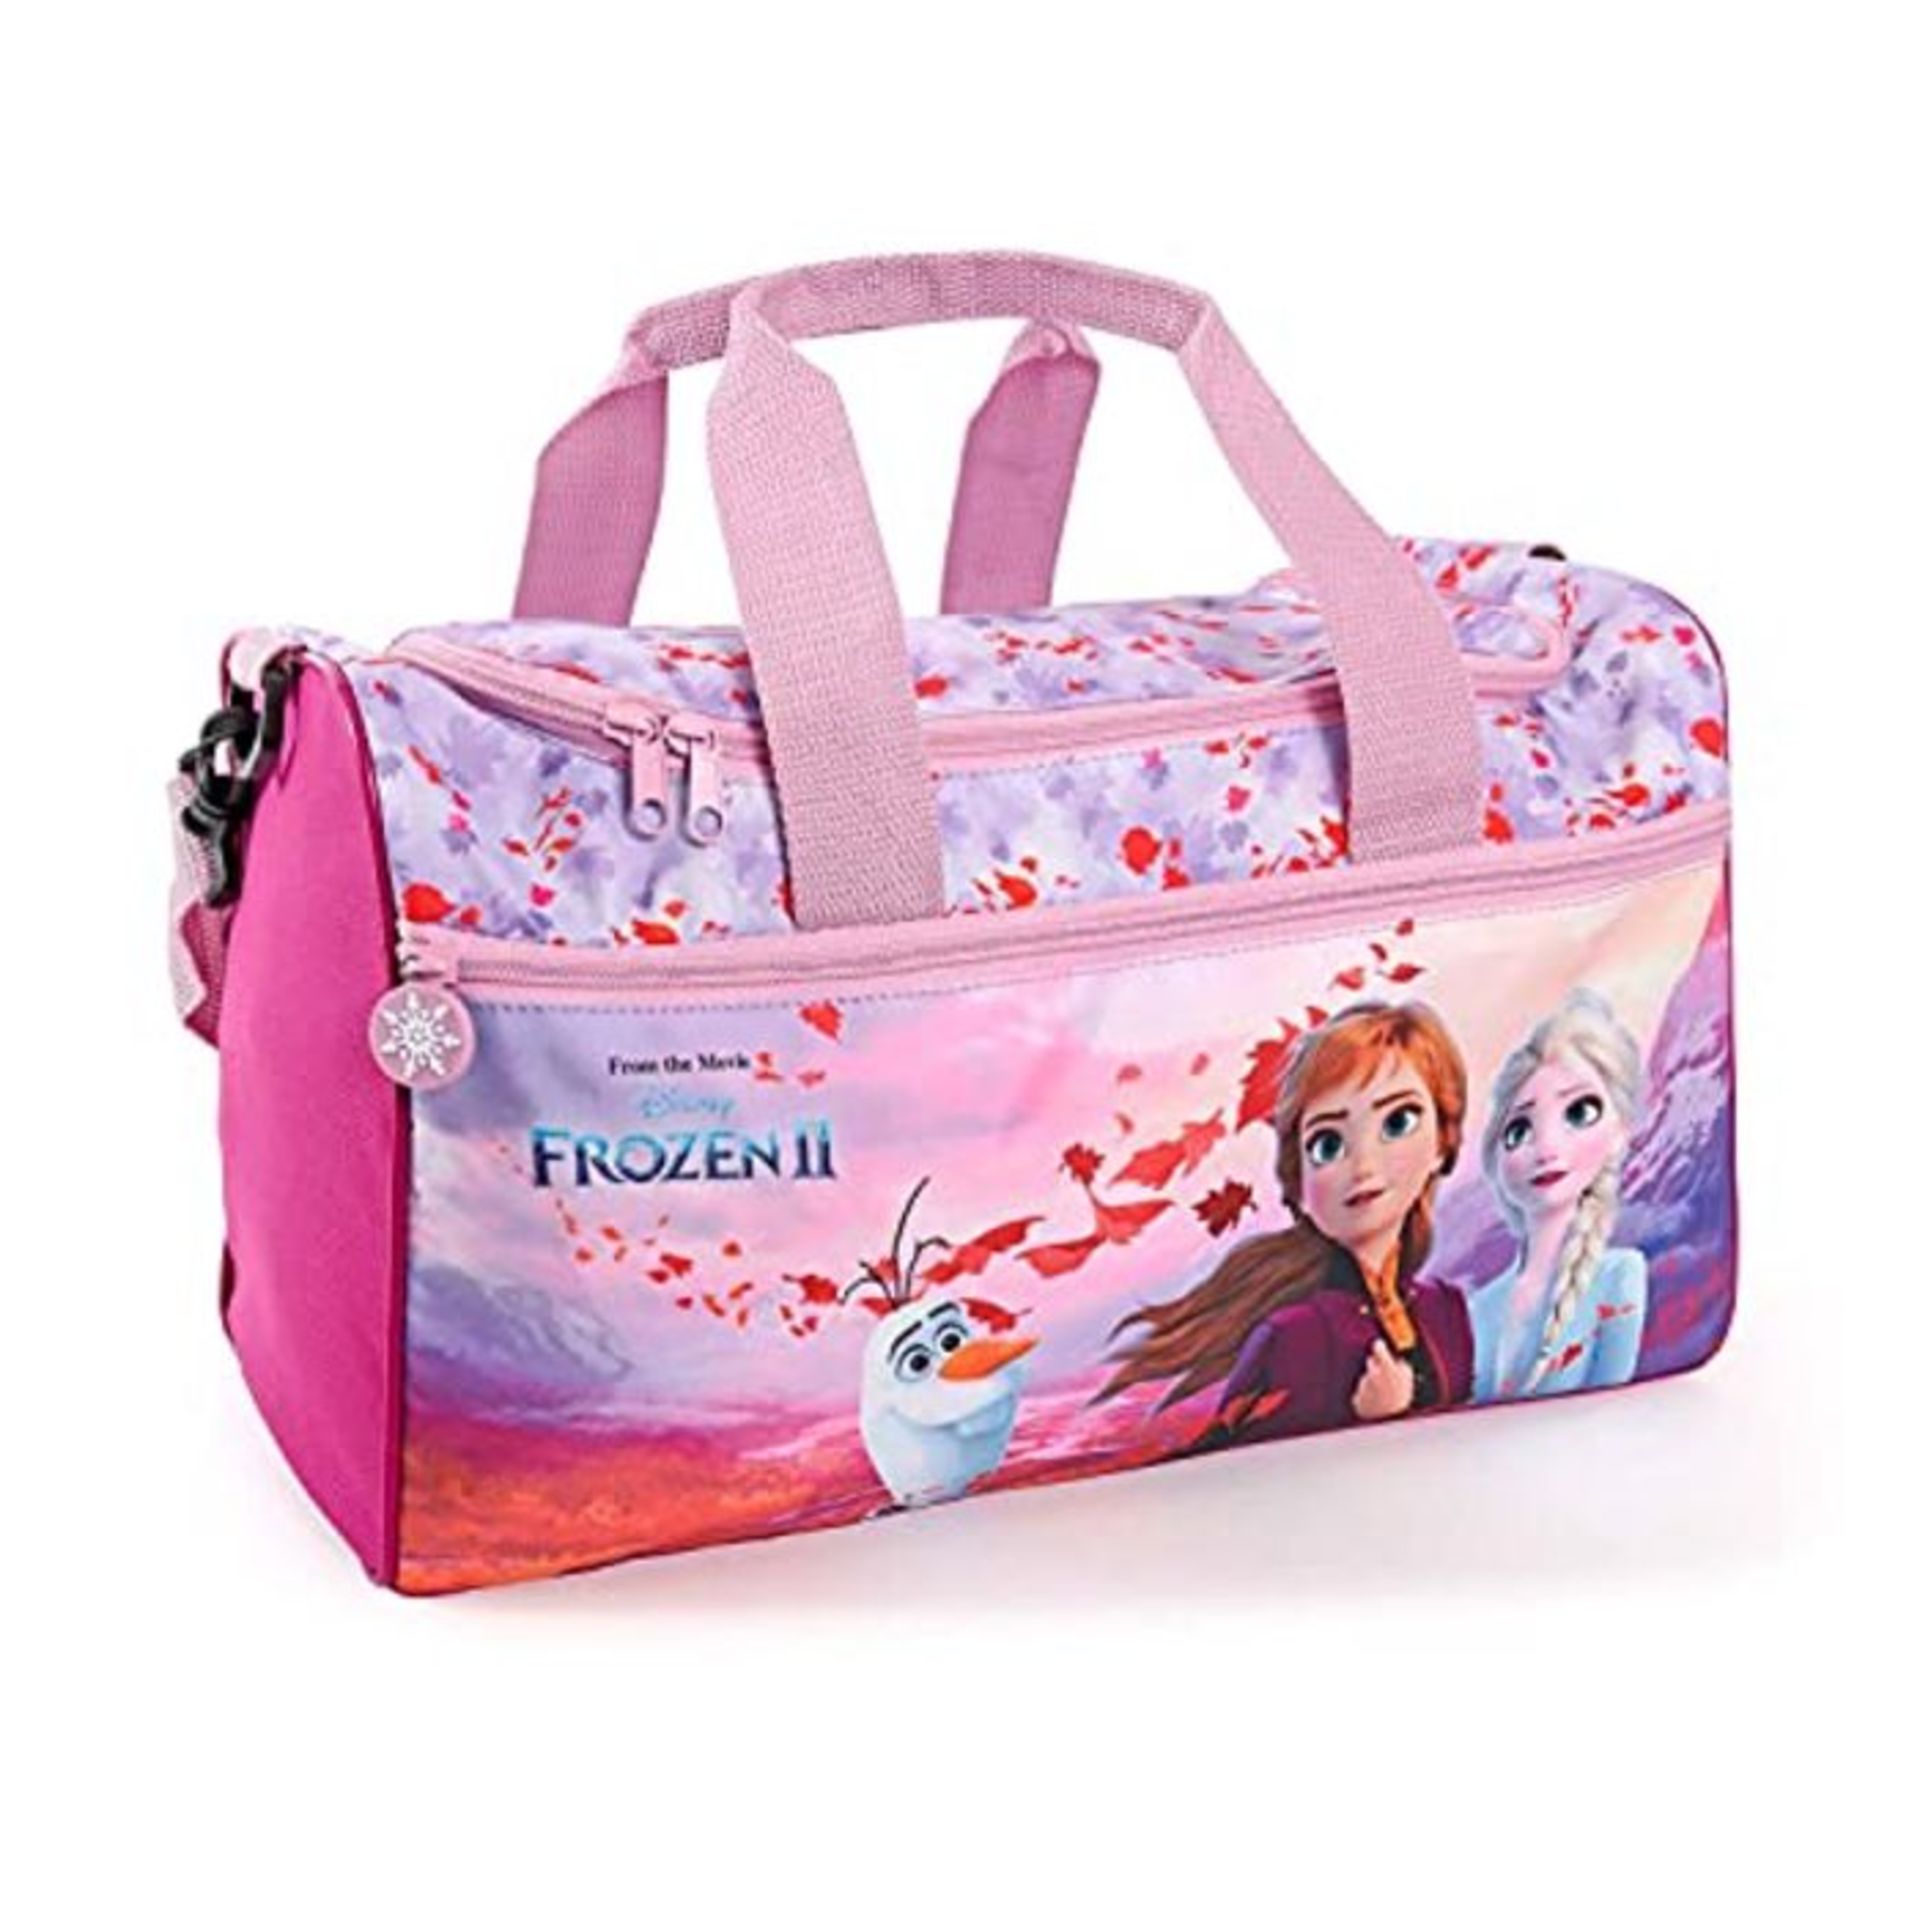 PERLETTI Disney Frozen 2 Duffle Bag for Little Girls - Sports Bag for Kids with Prince